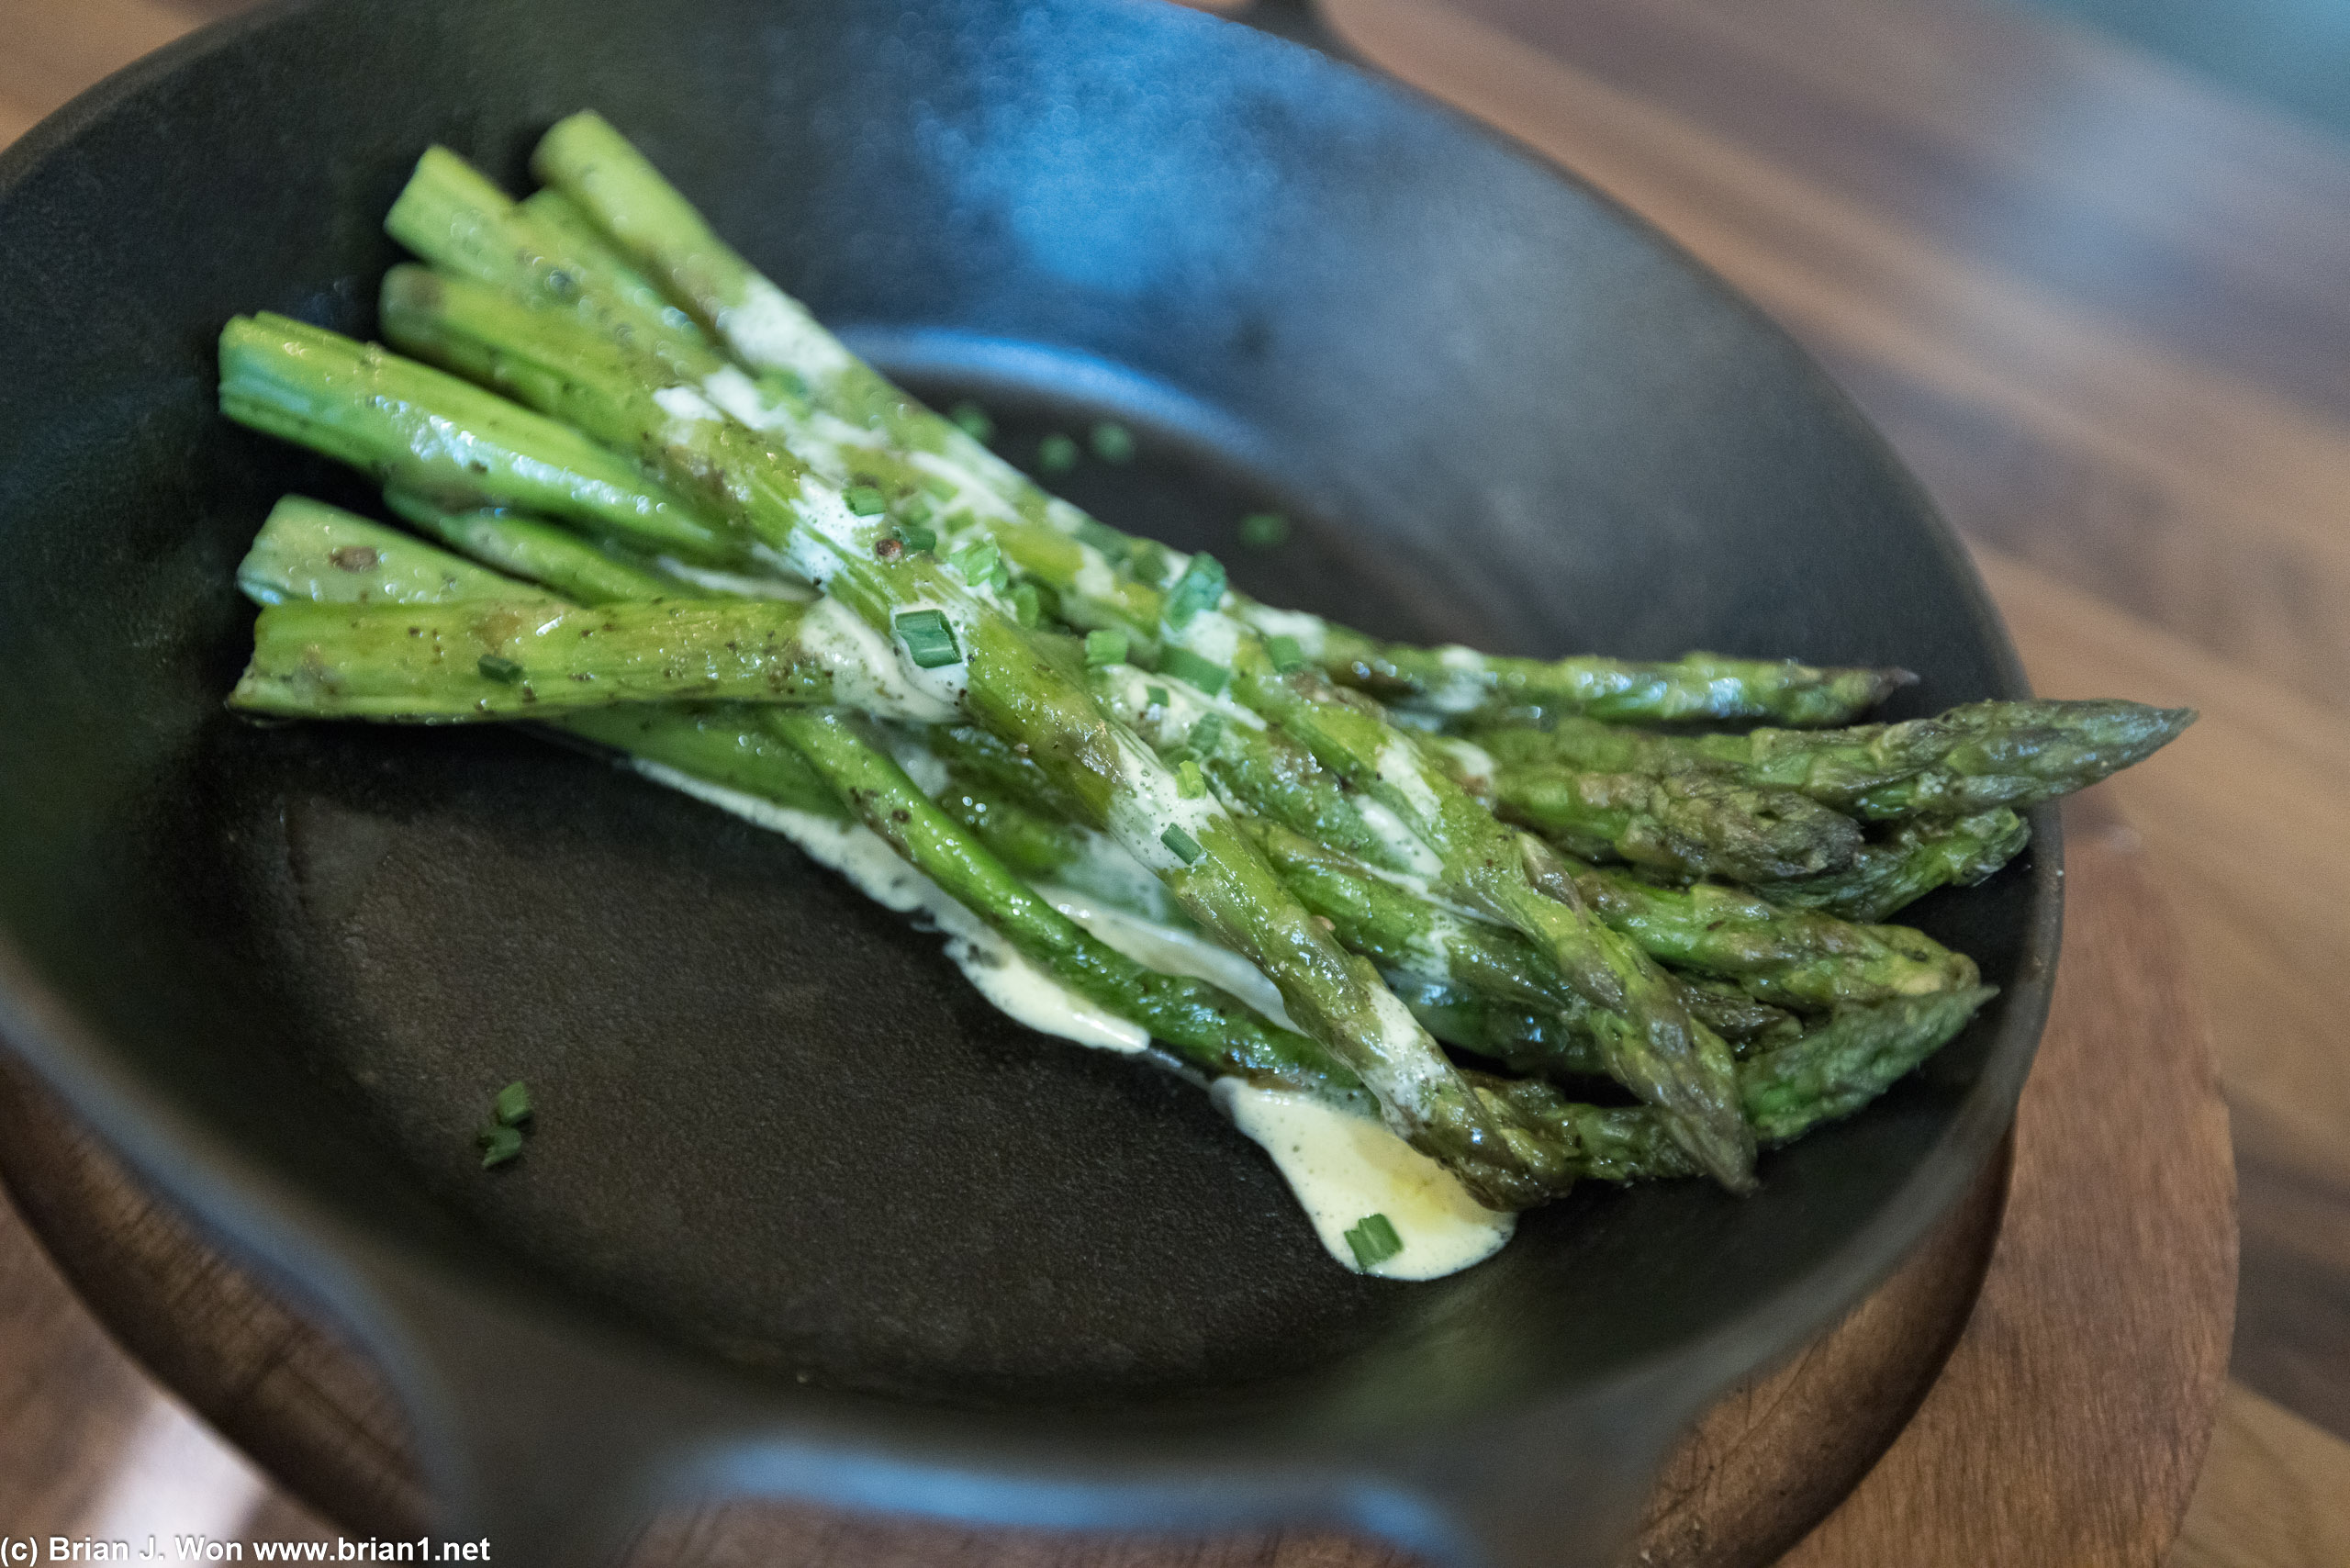 Asparagus was yum. Savory yet a little bit of lime zest.